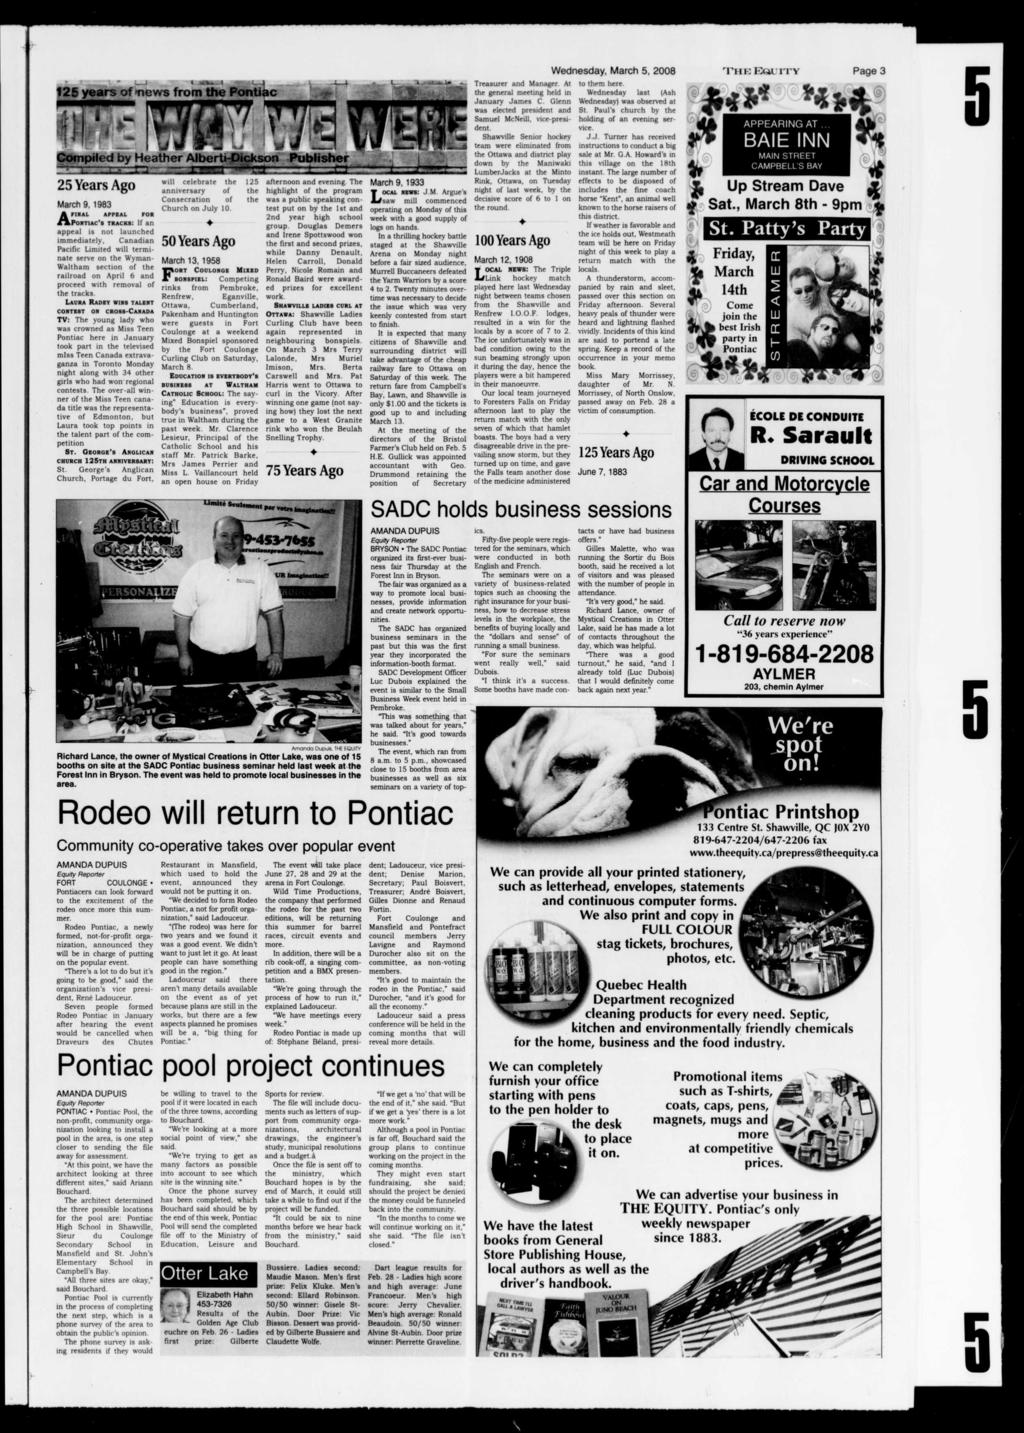 125 years of Tiews from Compiled by Heaher Alberi-Dickson Publisher 25 Years Ago March 9, 1983 AFINAL APPEAL FOR Poniac s racks: If an appeal is no launched immediaely, Canadian Pacific Limied will